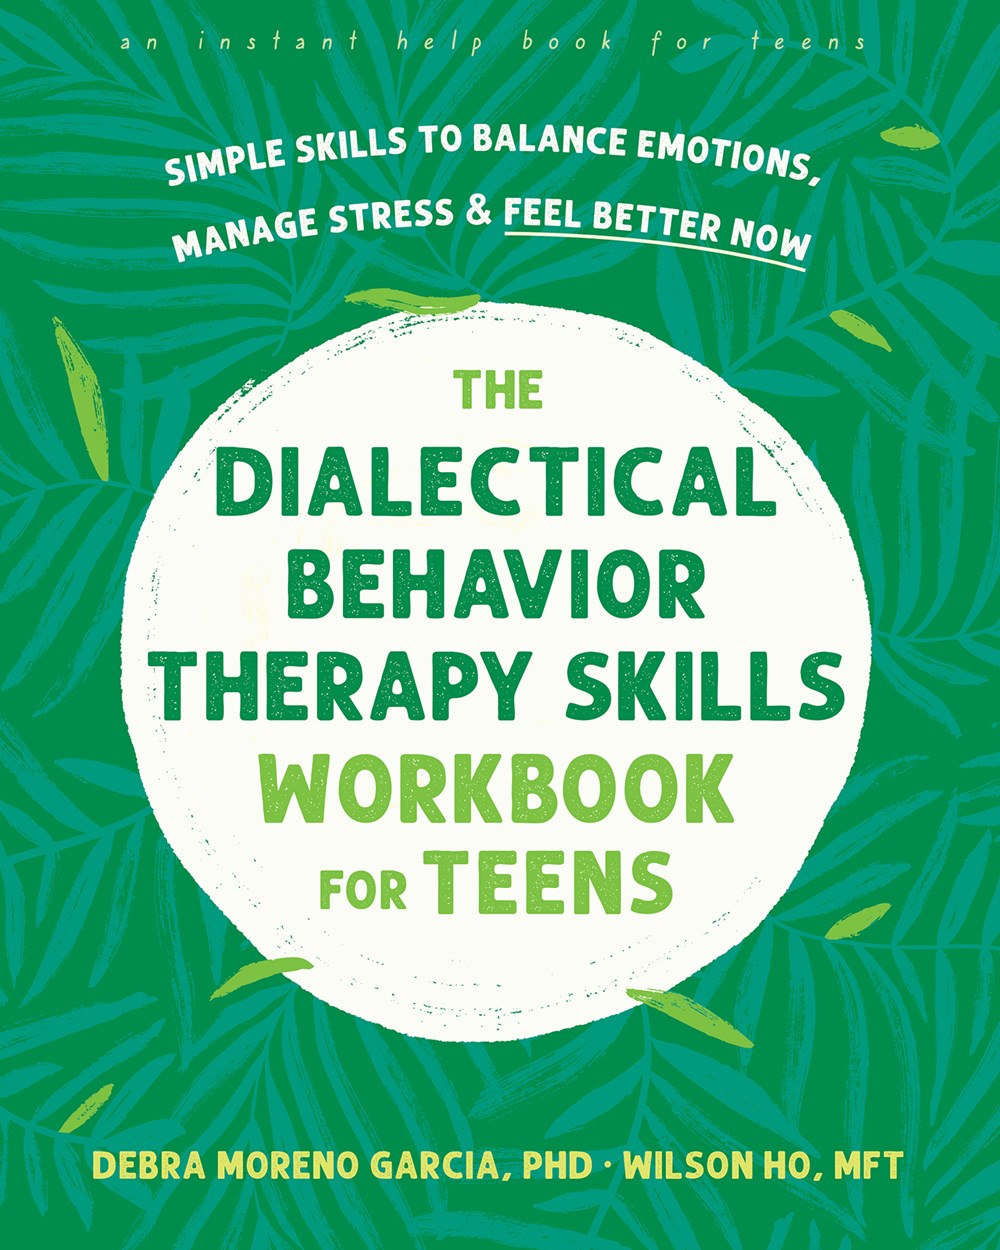 The Dialectical Behavior Therapy Skills Workbook for Teens : Simple Skills to Balance Emotions, Manage Stress, and Feel Better Now